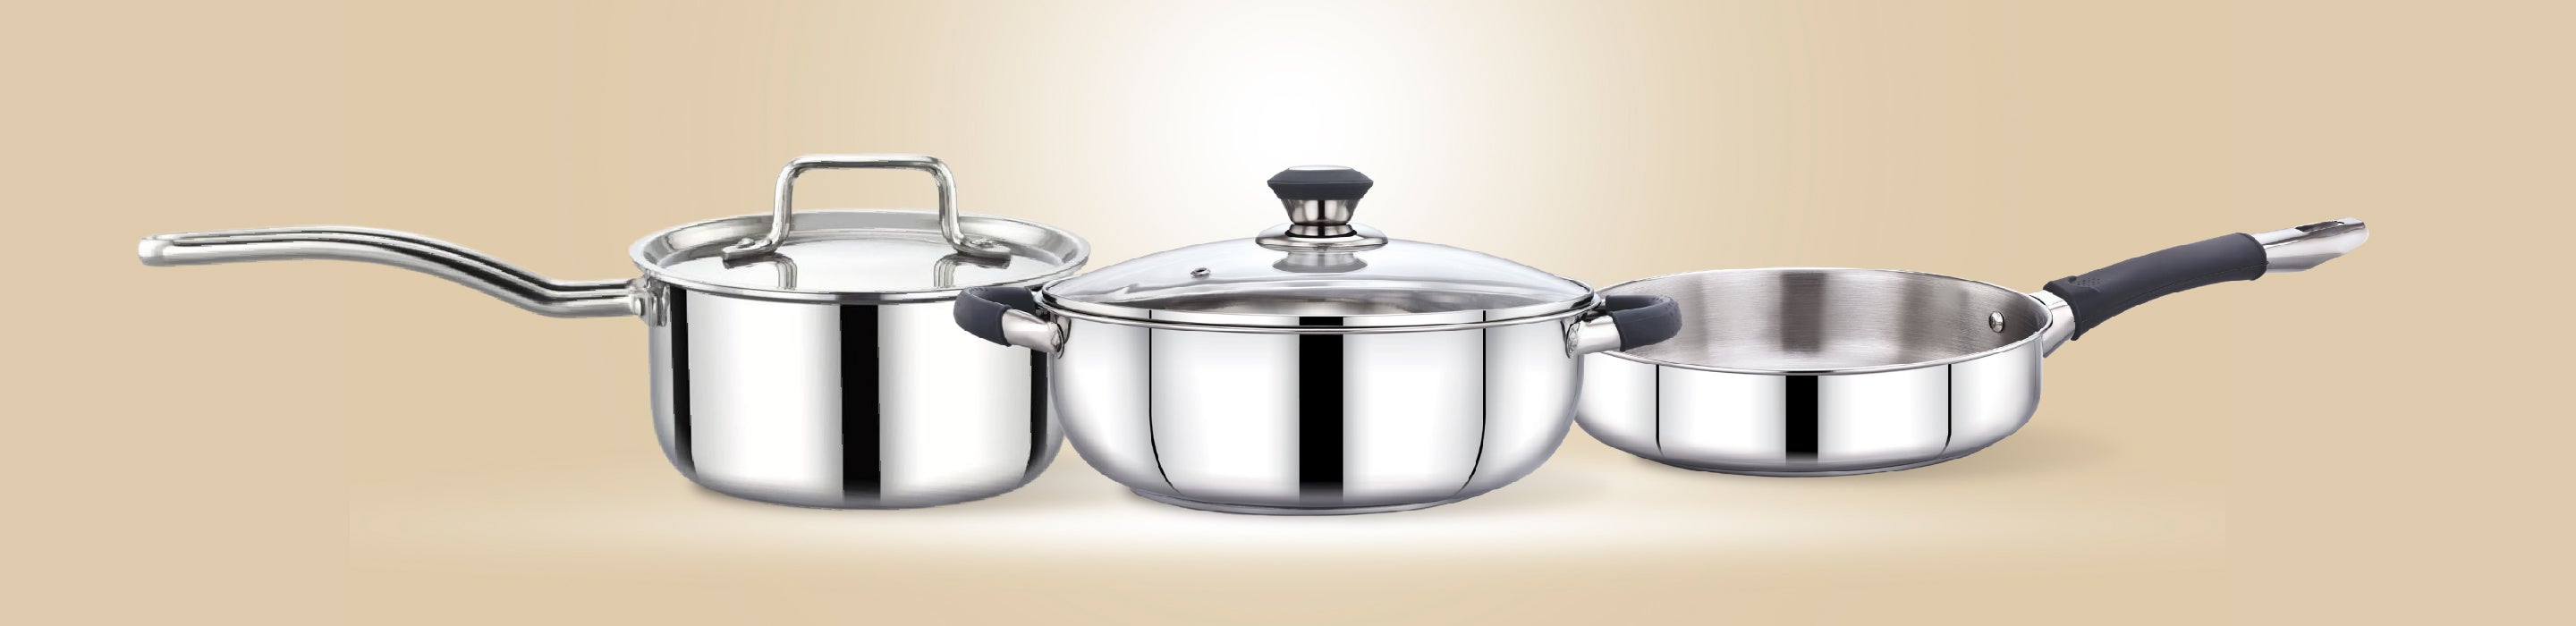 cookware banner image